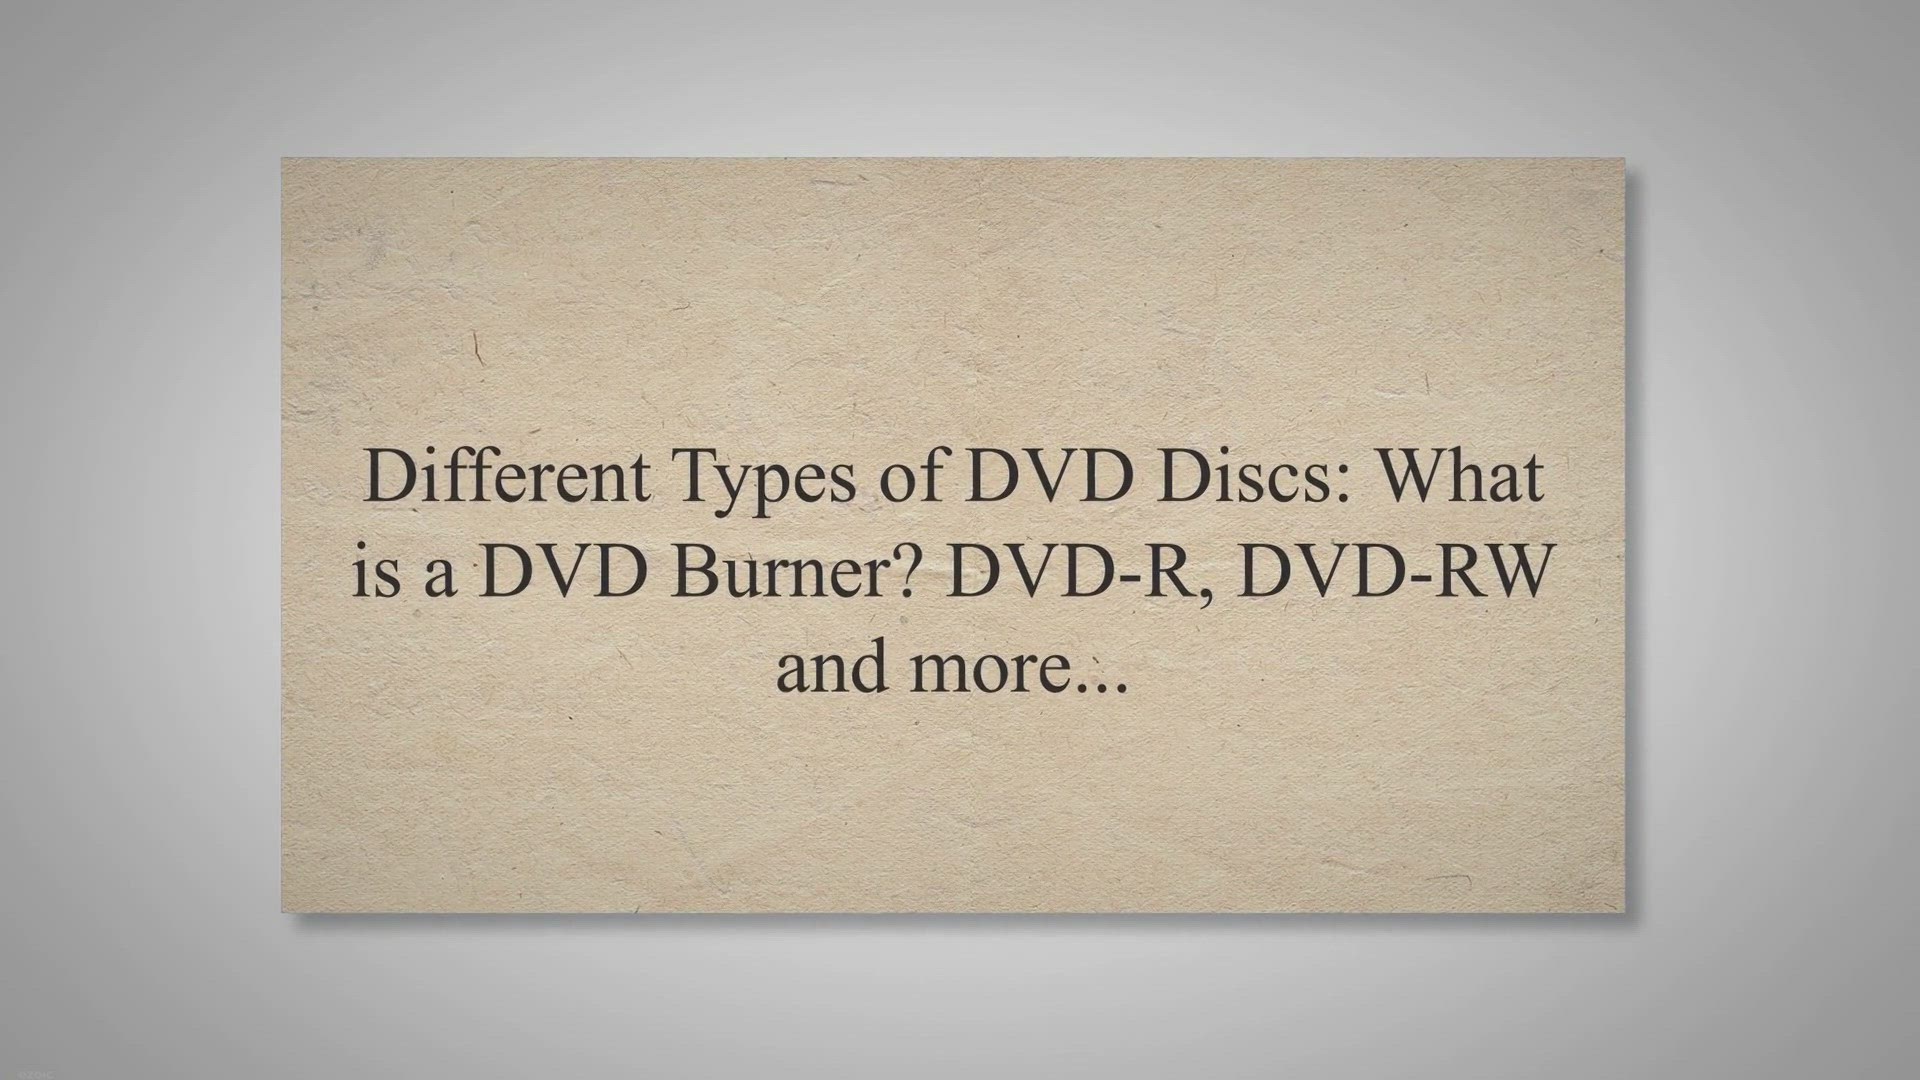 DVD-R Definition - What is a DVD-R disc?